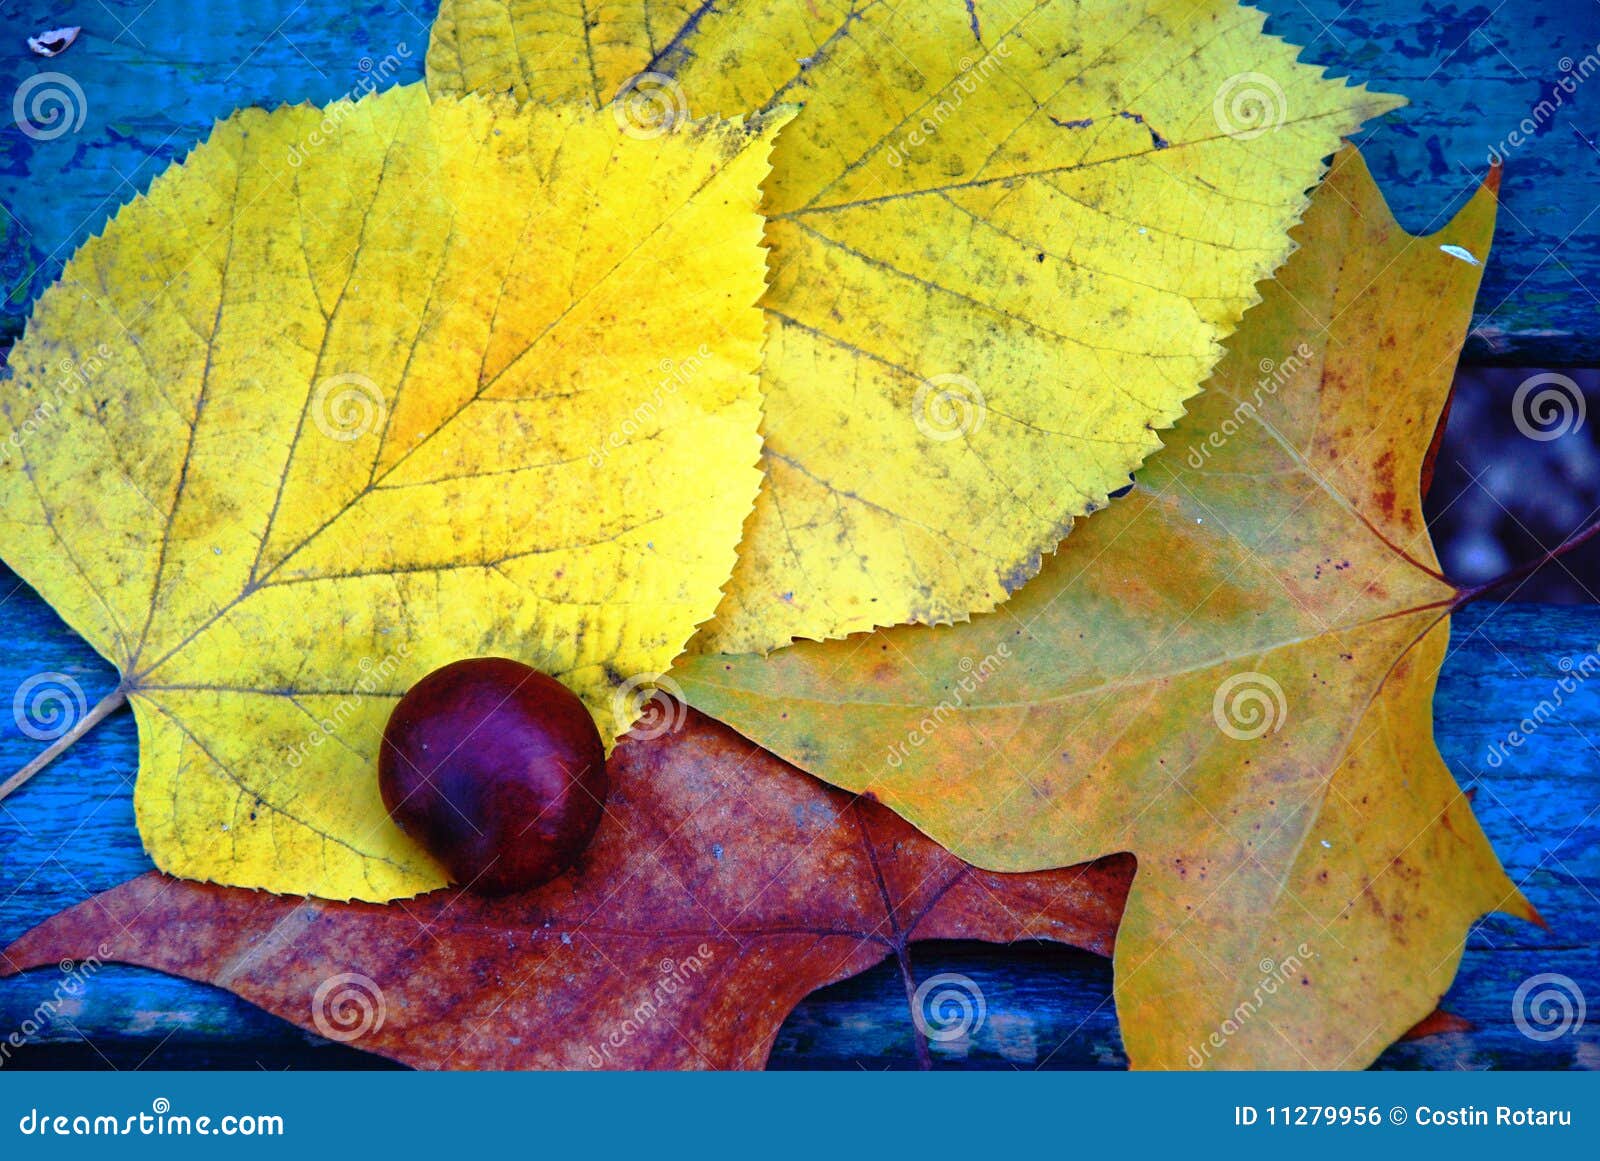 Autumnal view of yellow leaves and a chestnut